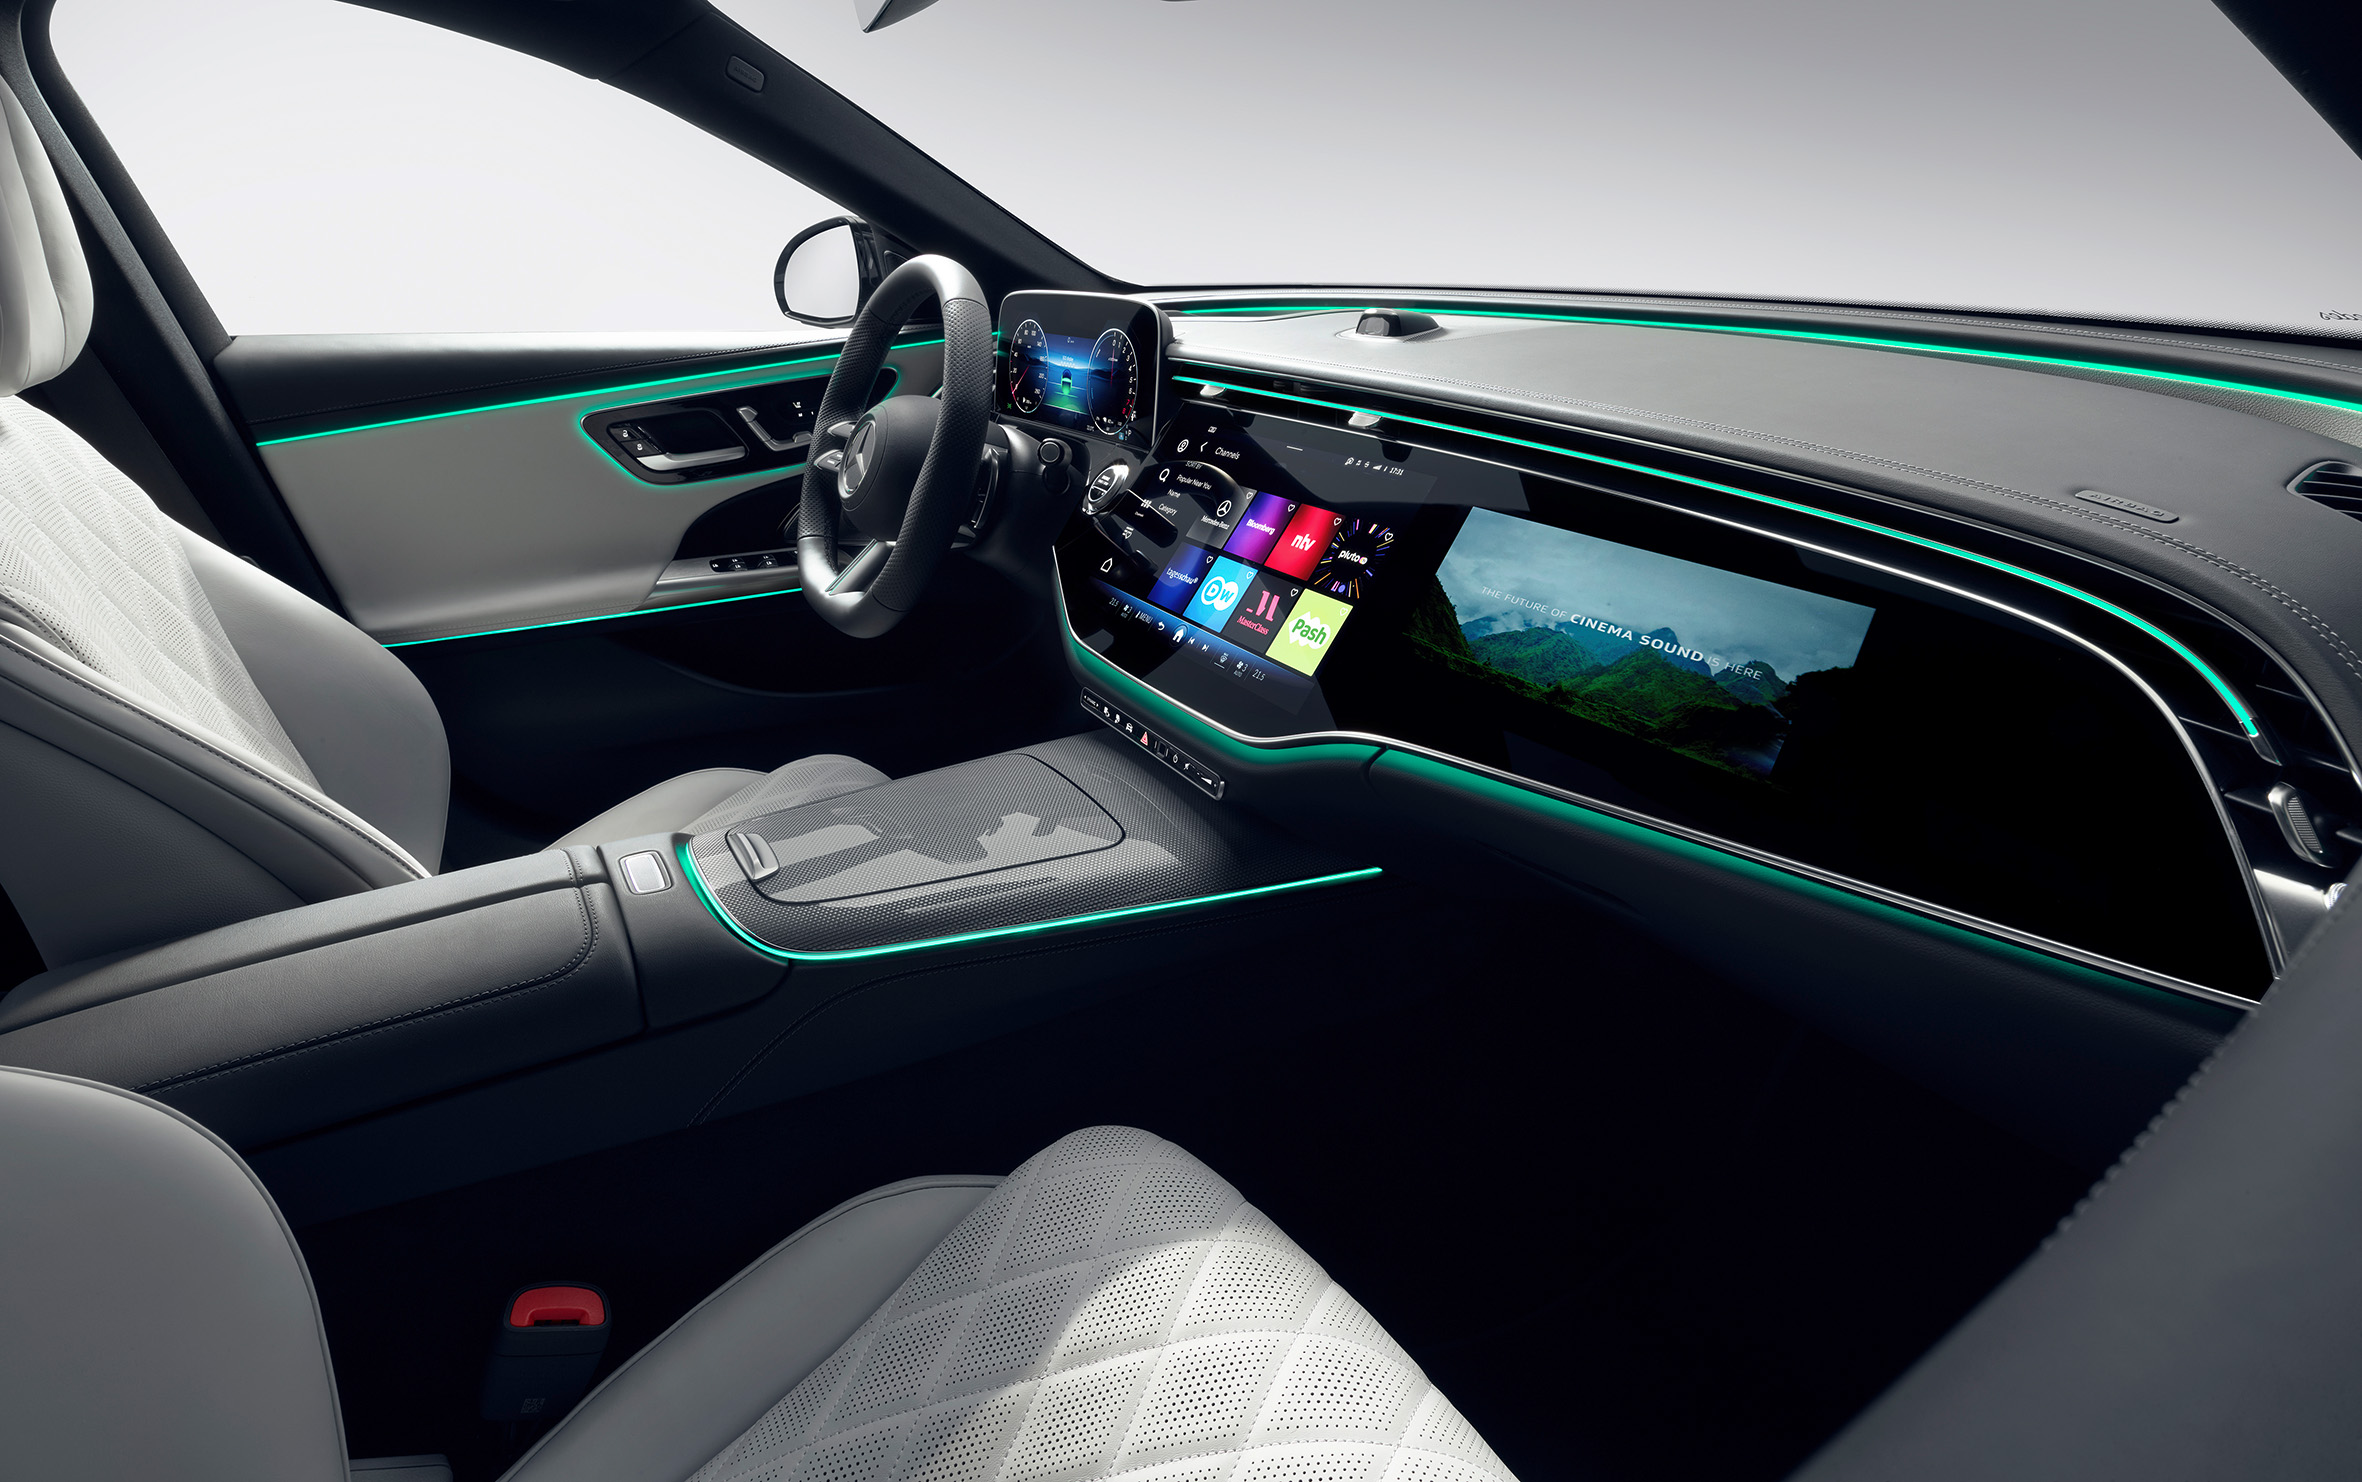 Interior of the new E-Class with light strips